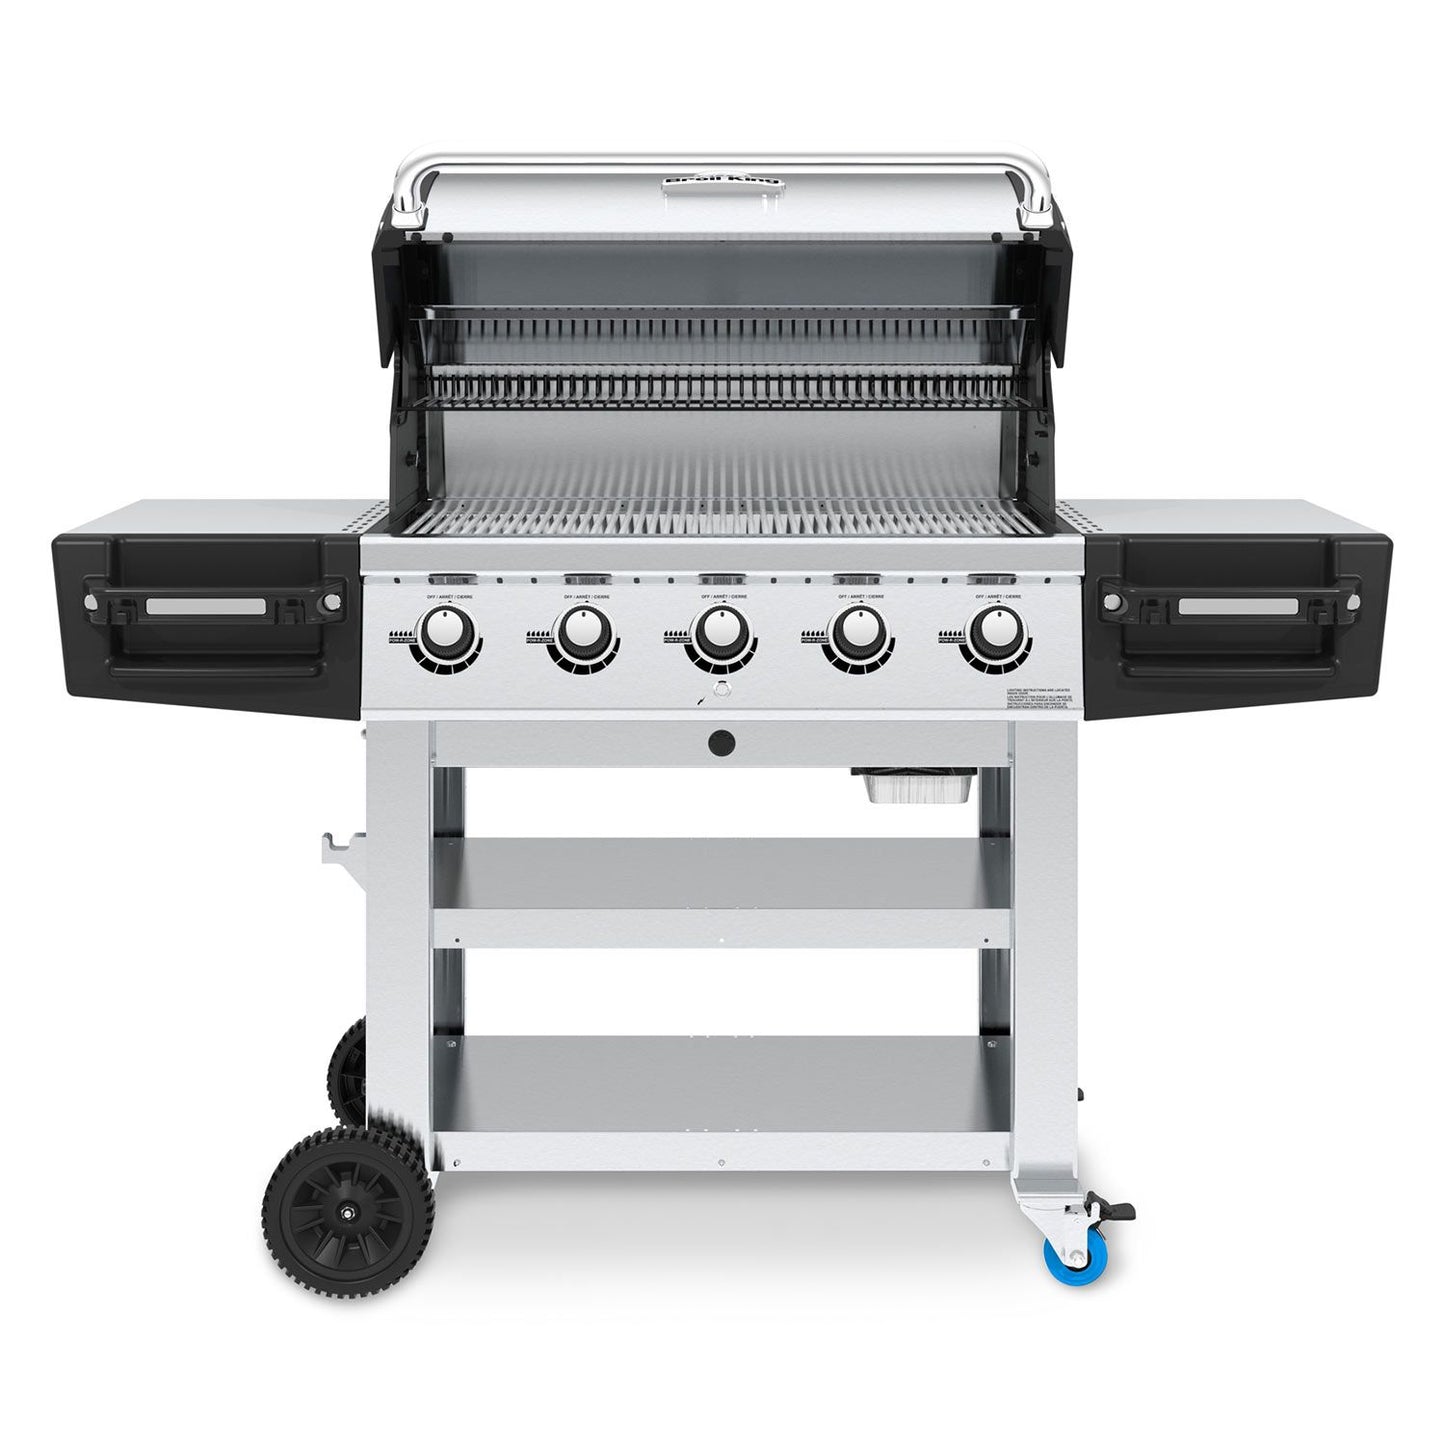 Broil King Regal S 510 Commercial Gas Grill BK88611